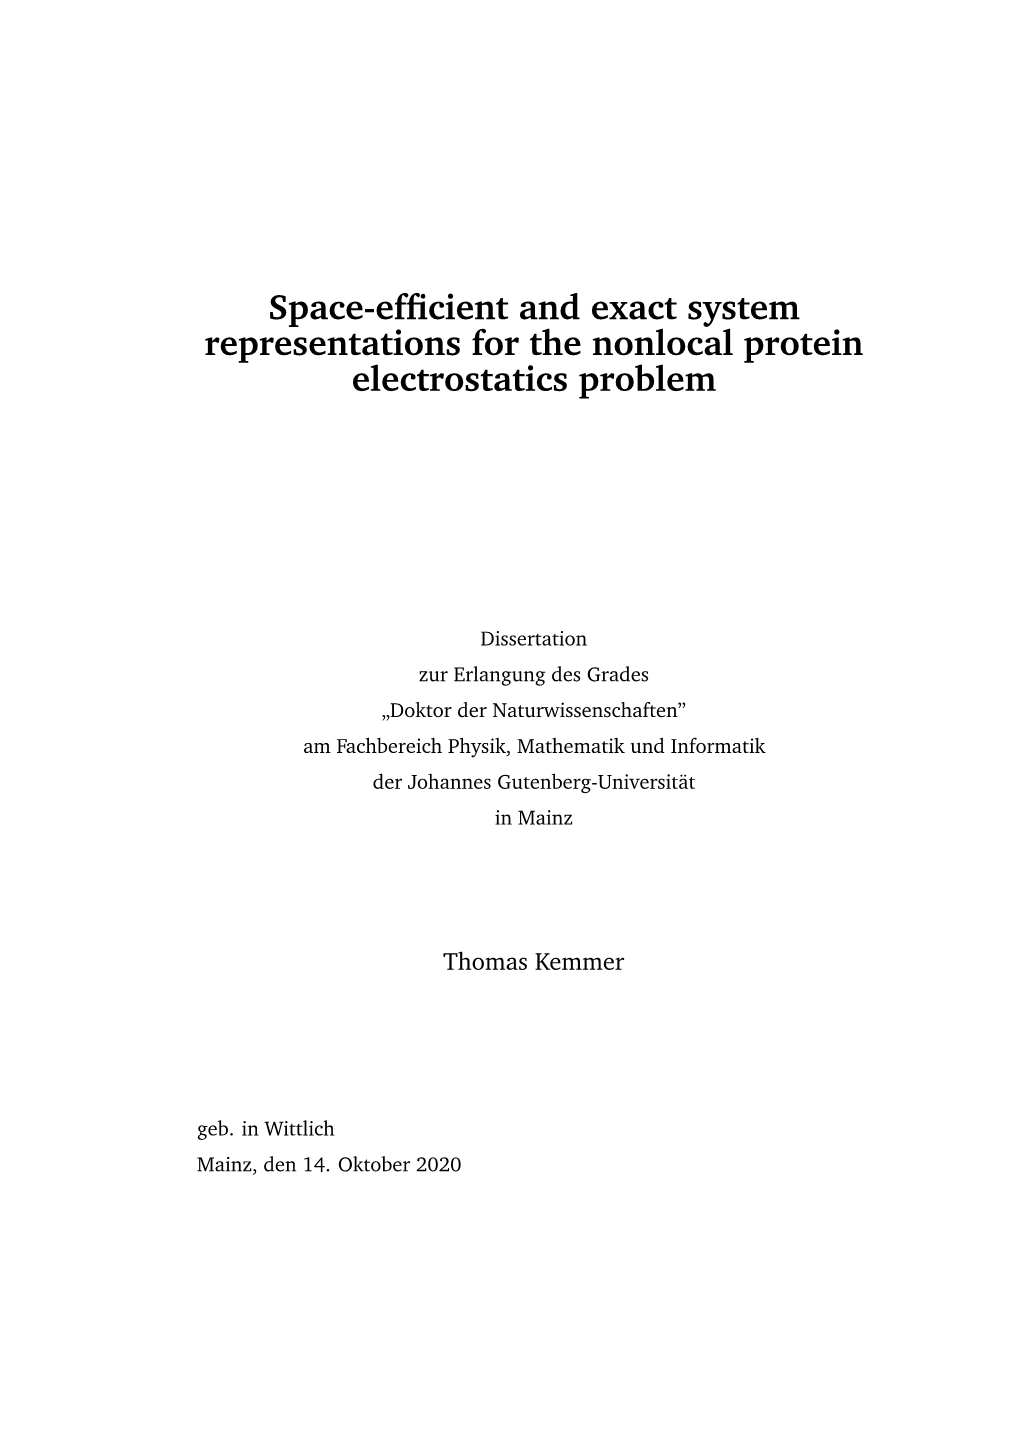 Space-Efficient and Exact System Representations for the Nonlocal